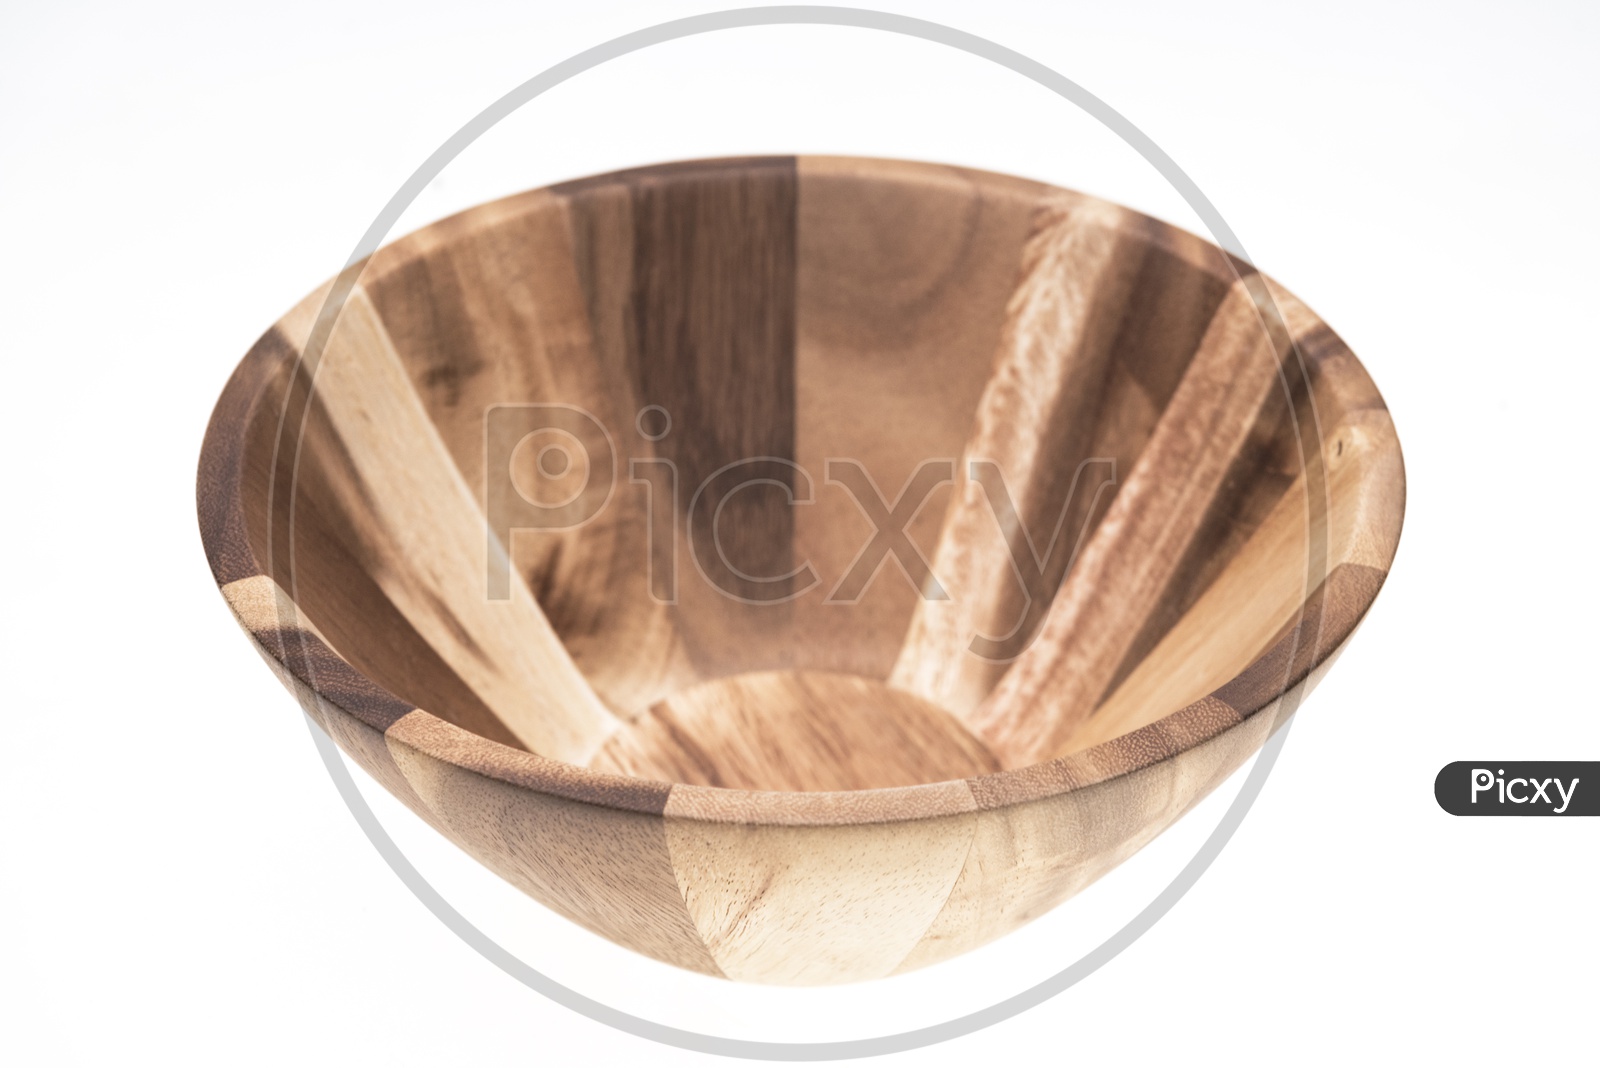 Wooden Bowls Or Food Containers  on an Isolated White Background